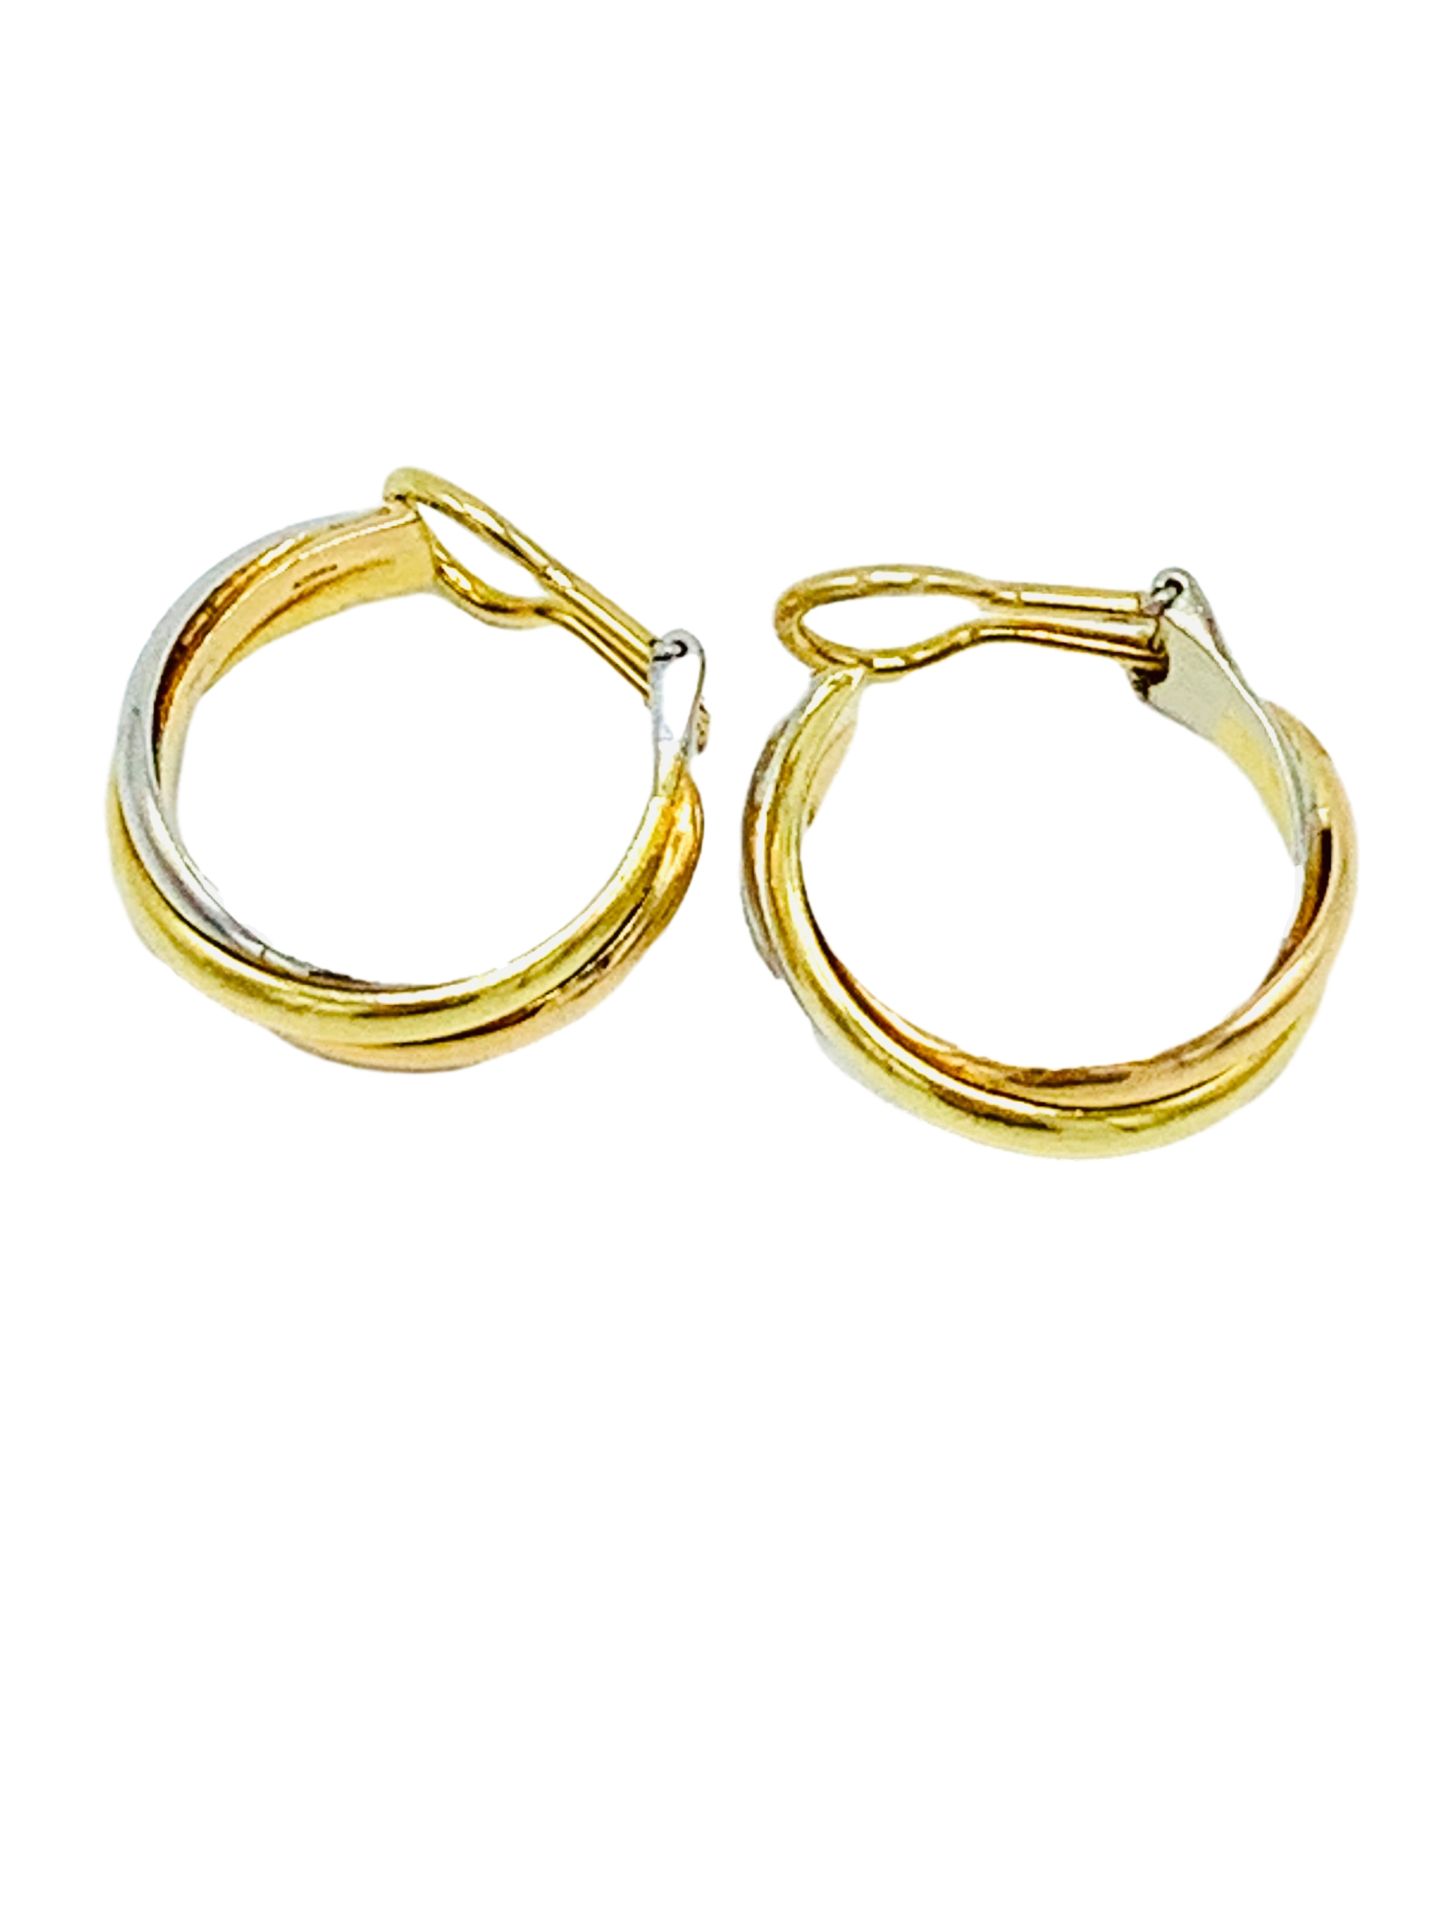 18ct gold Cartier three colour twist earrings. - Image 3 of 5